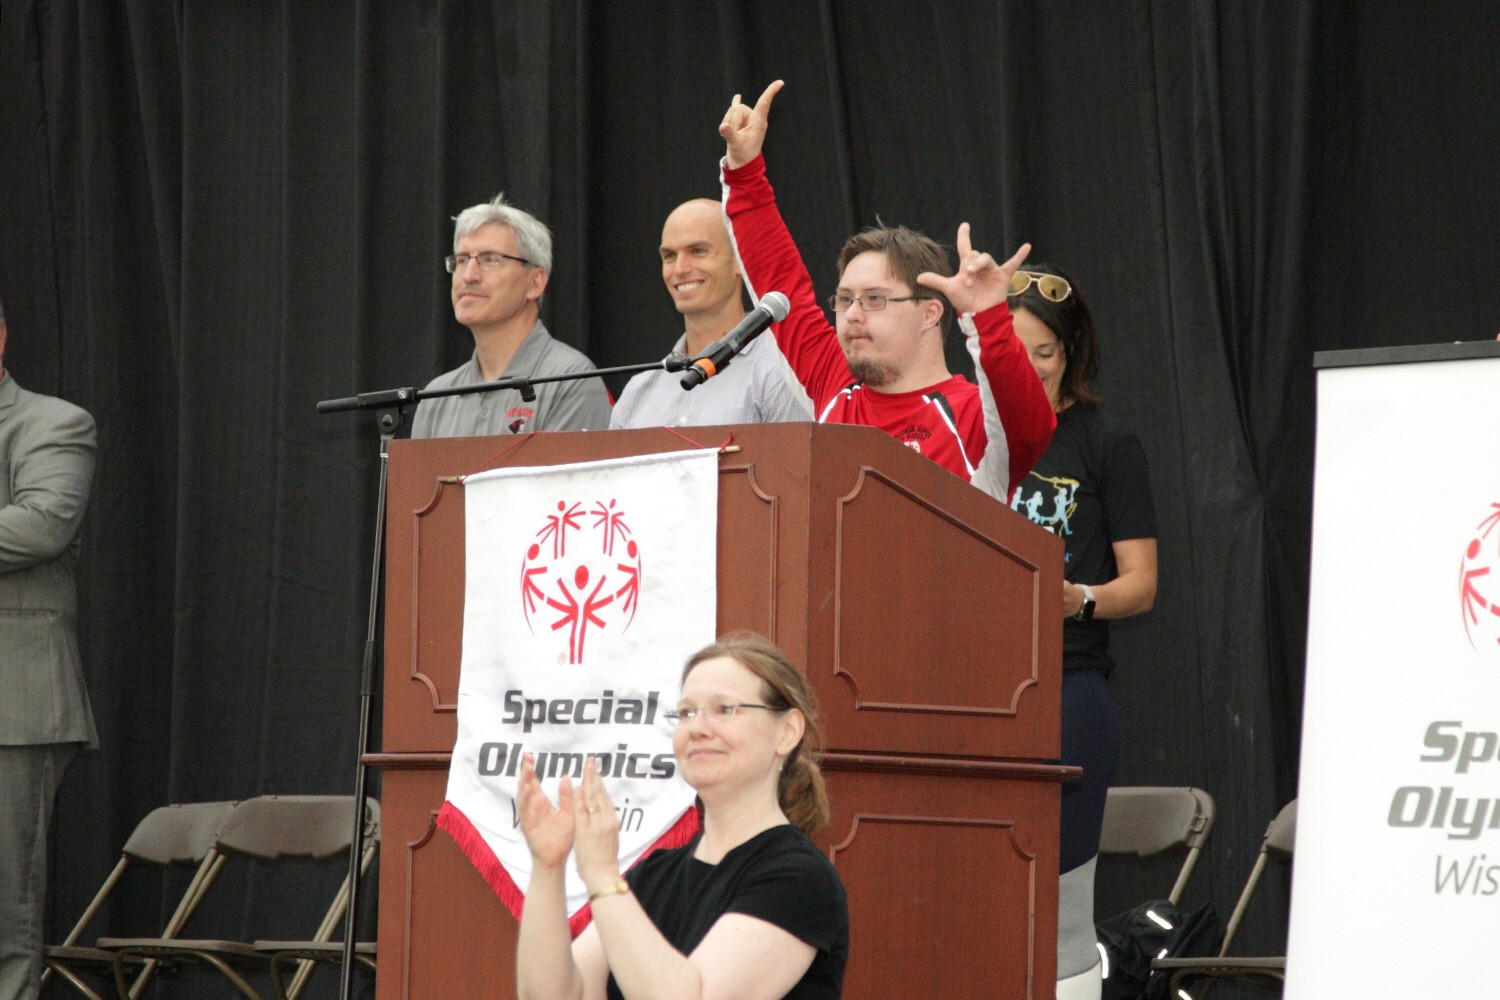 Cole Cleworth after giving an inspired Athlete Oath at the 2017 Summer Games